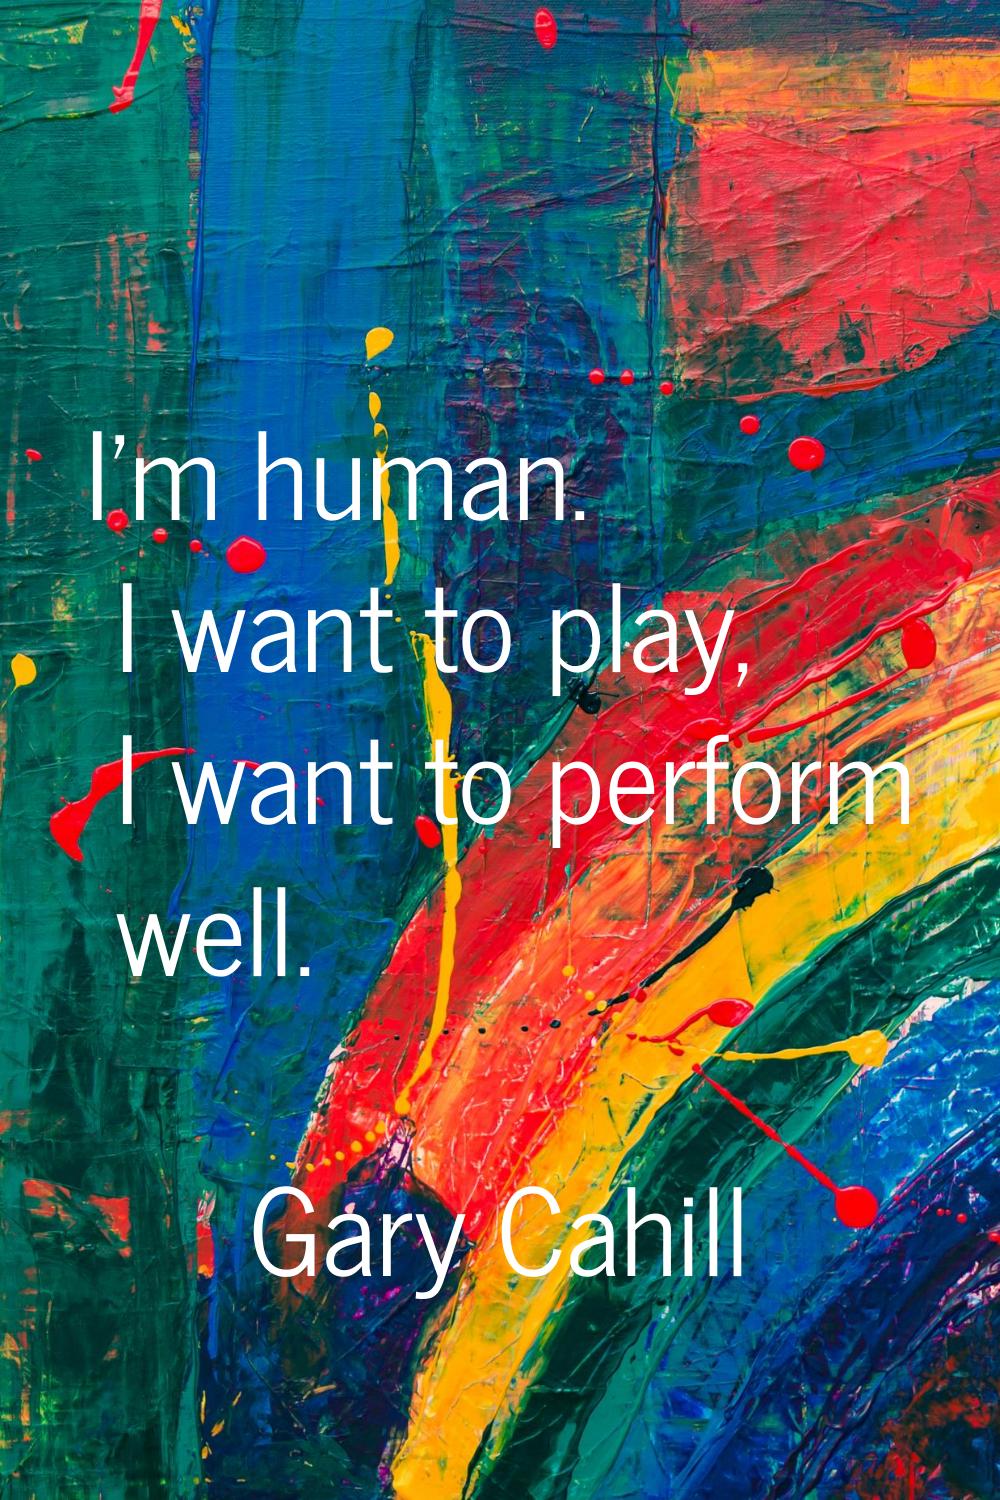 I'm human. I want to play, I want to perform well.